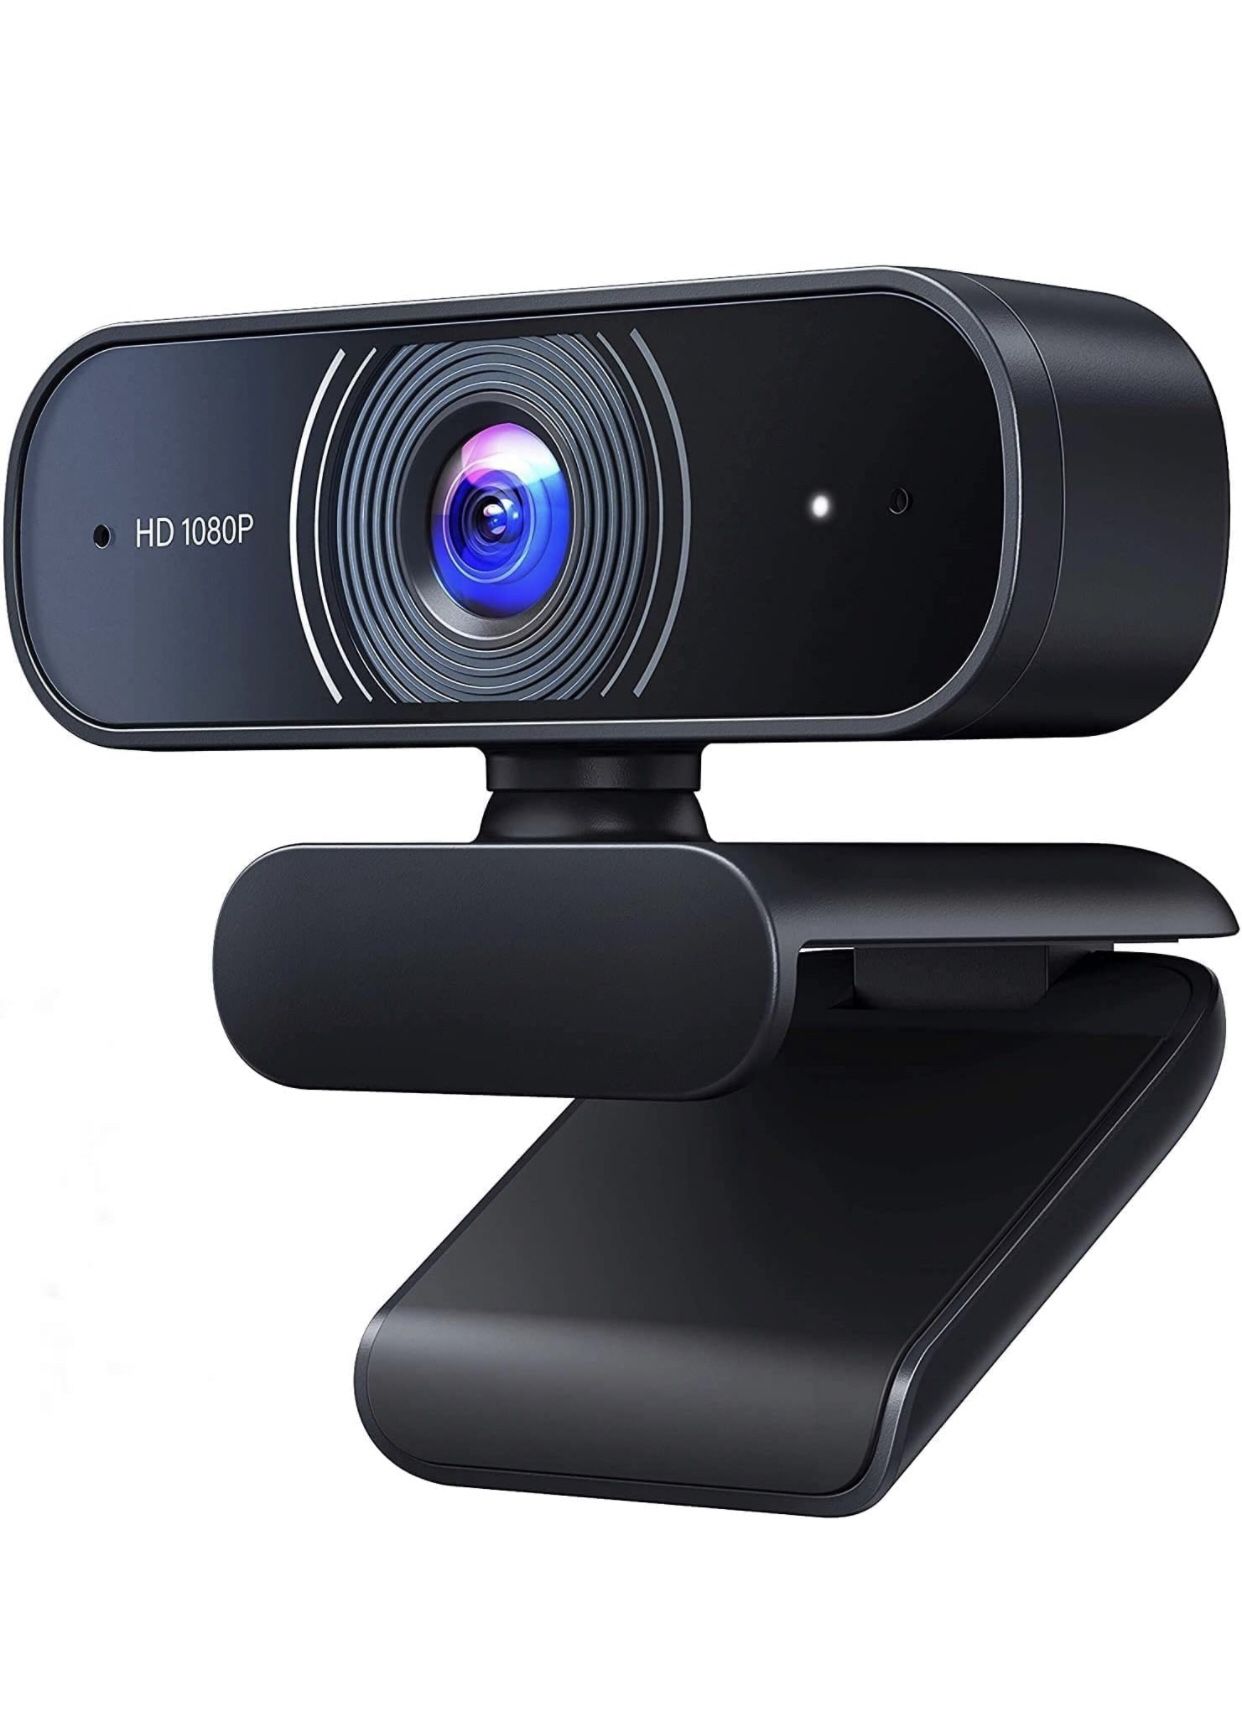 1080P Webcam, Dual Built-in Microphones, Full HD Video Camera for Computers PC Laptop Desktop, USB Plug and Play